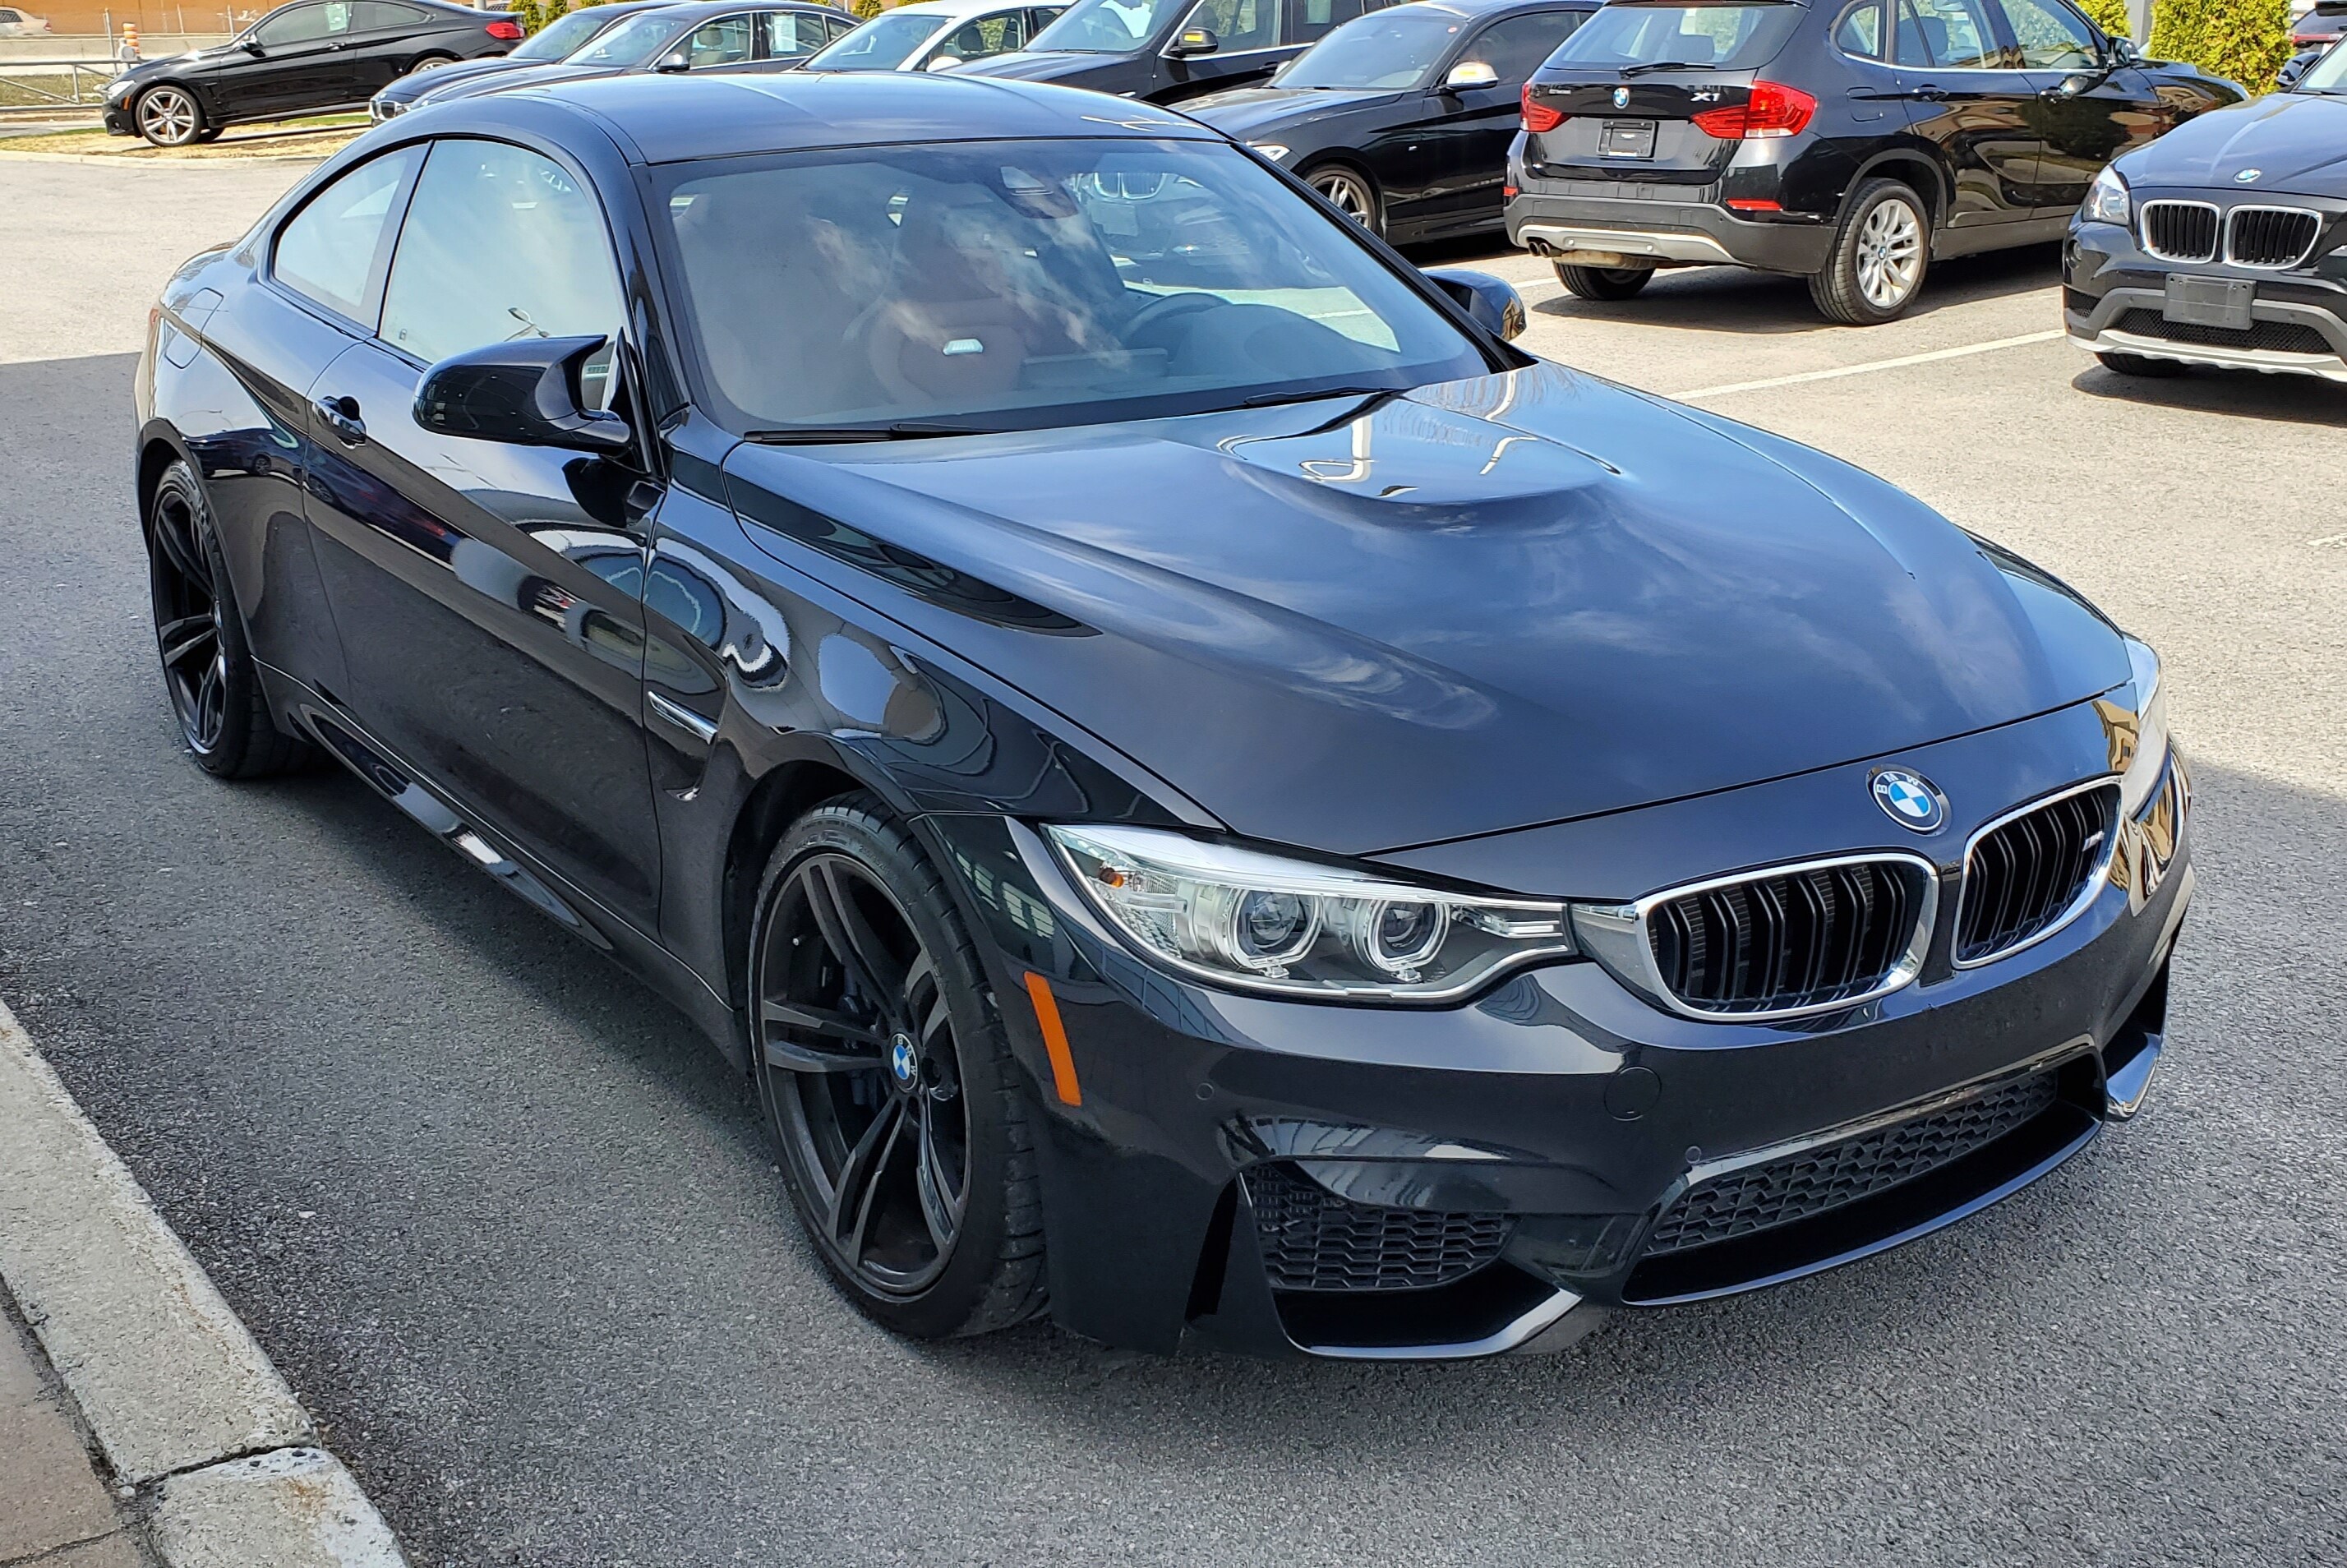  BMW M4 YOUR TICKET INTO